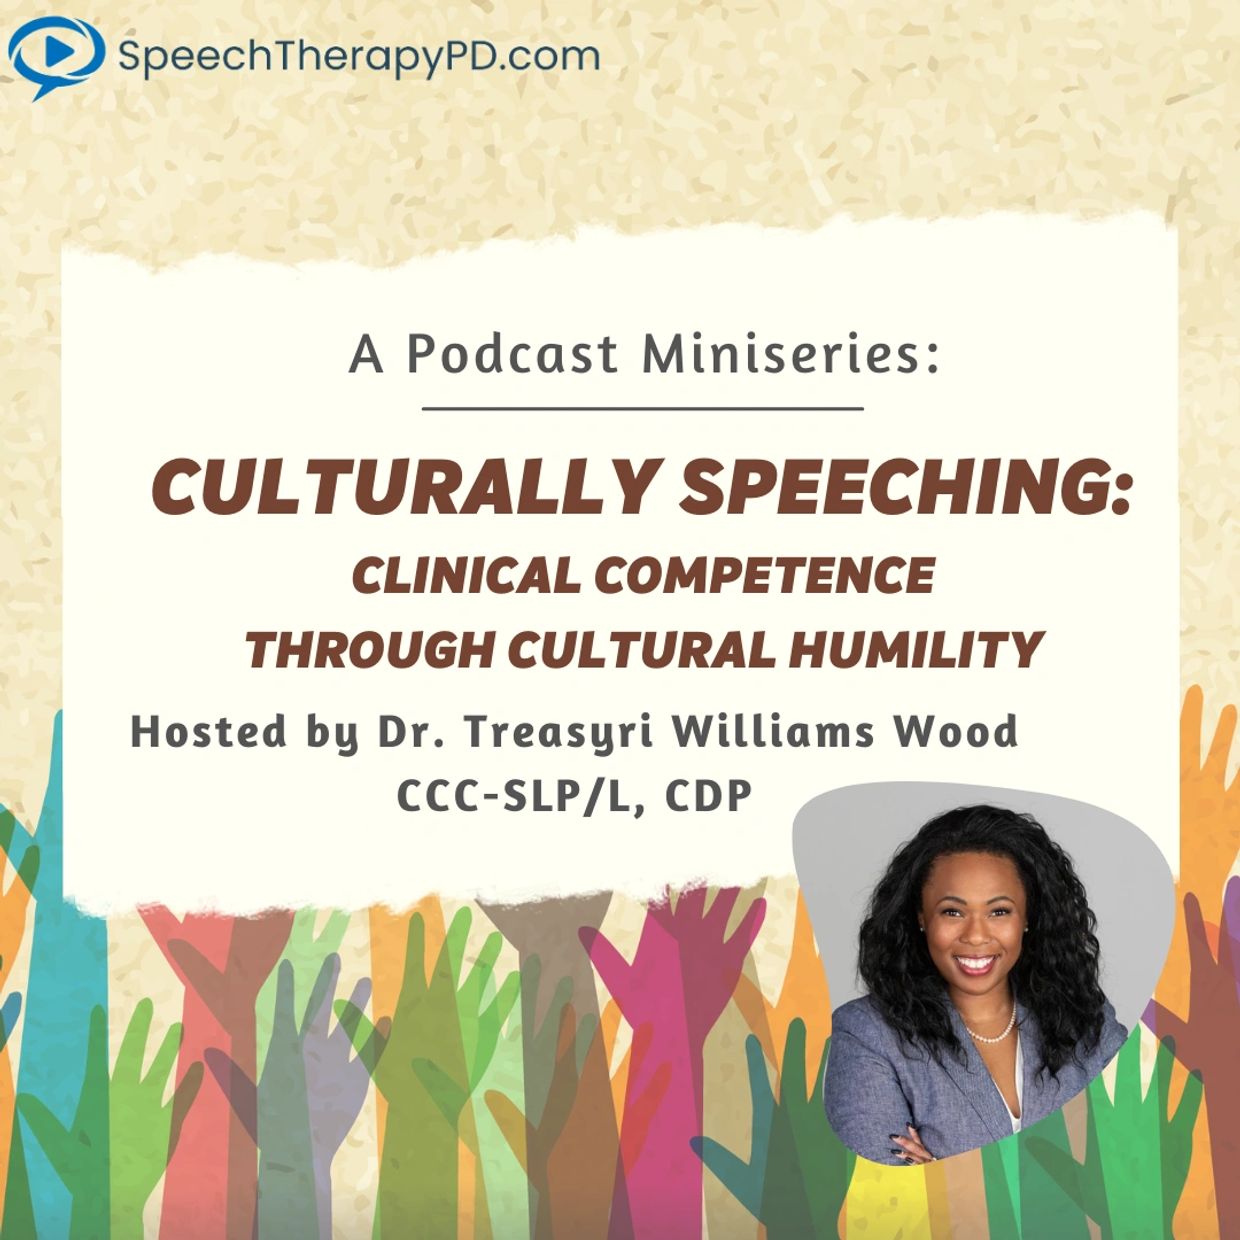 Cultural Humility through Communication Justice